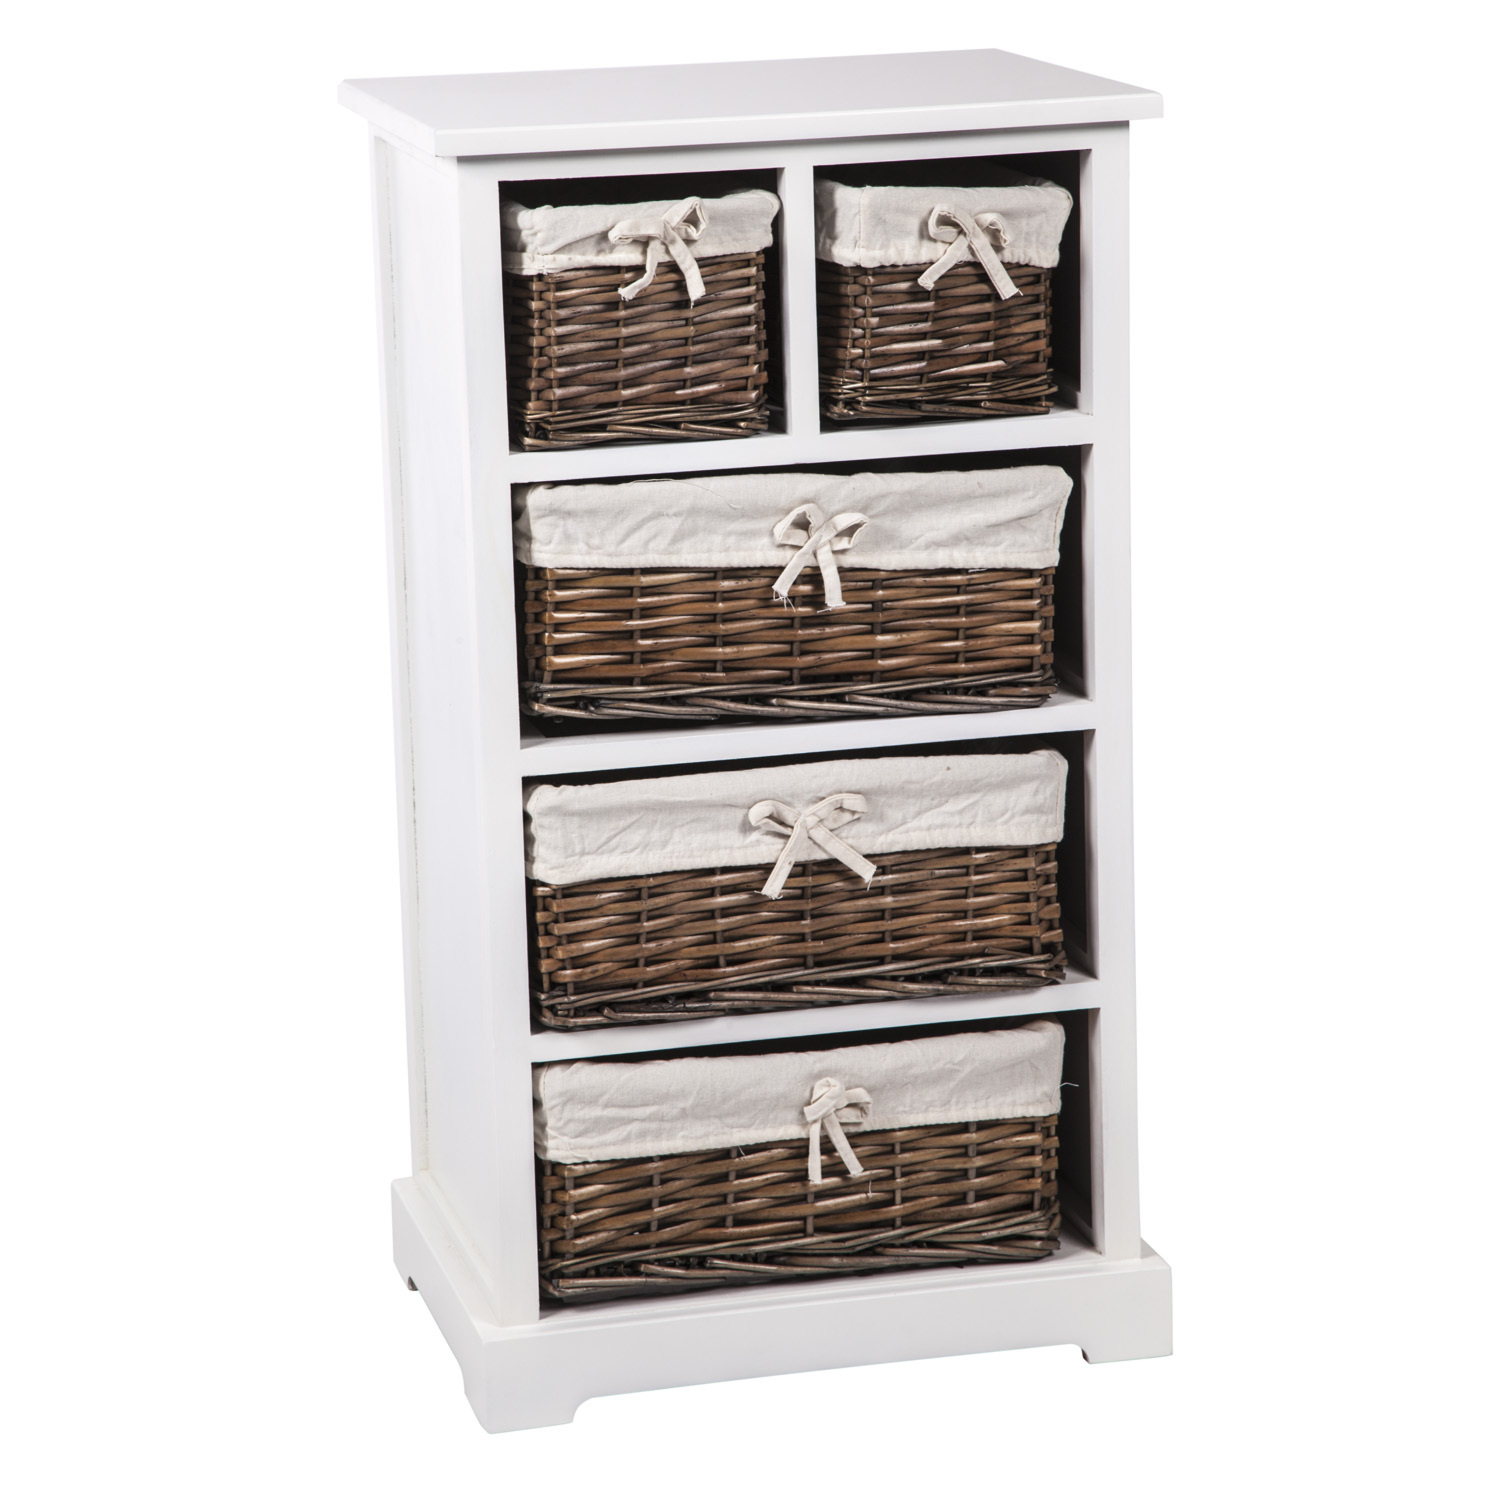 Buttermere Basket Chest - White Image 2